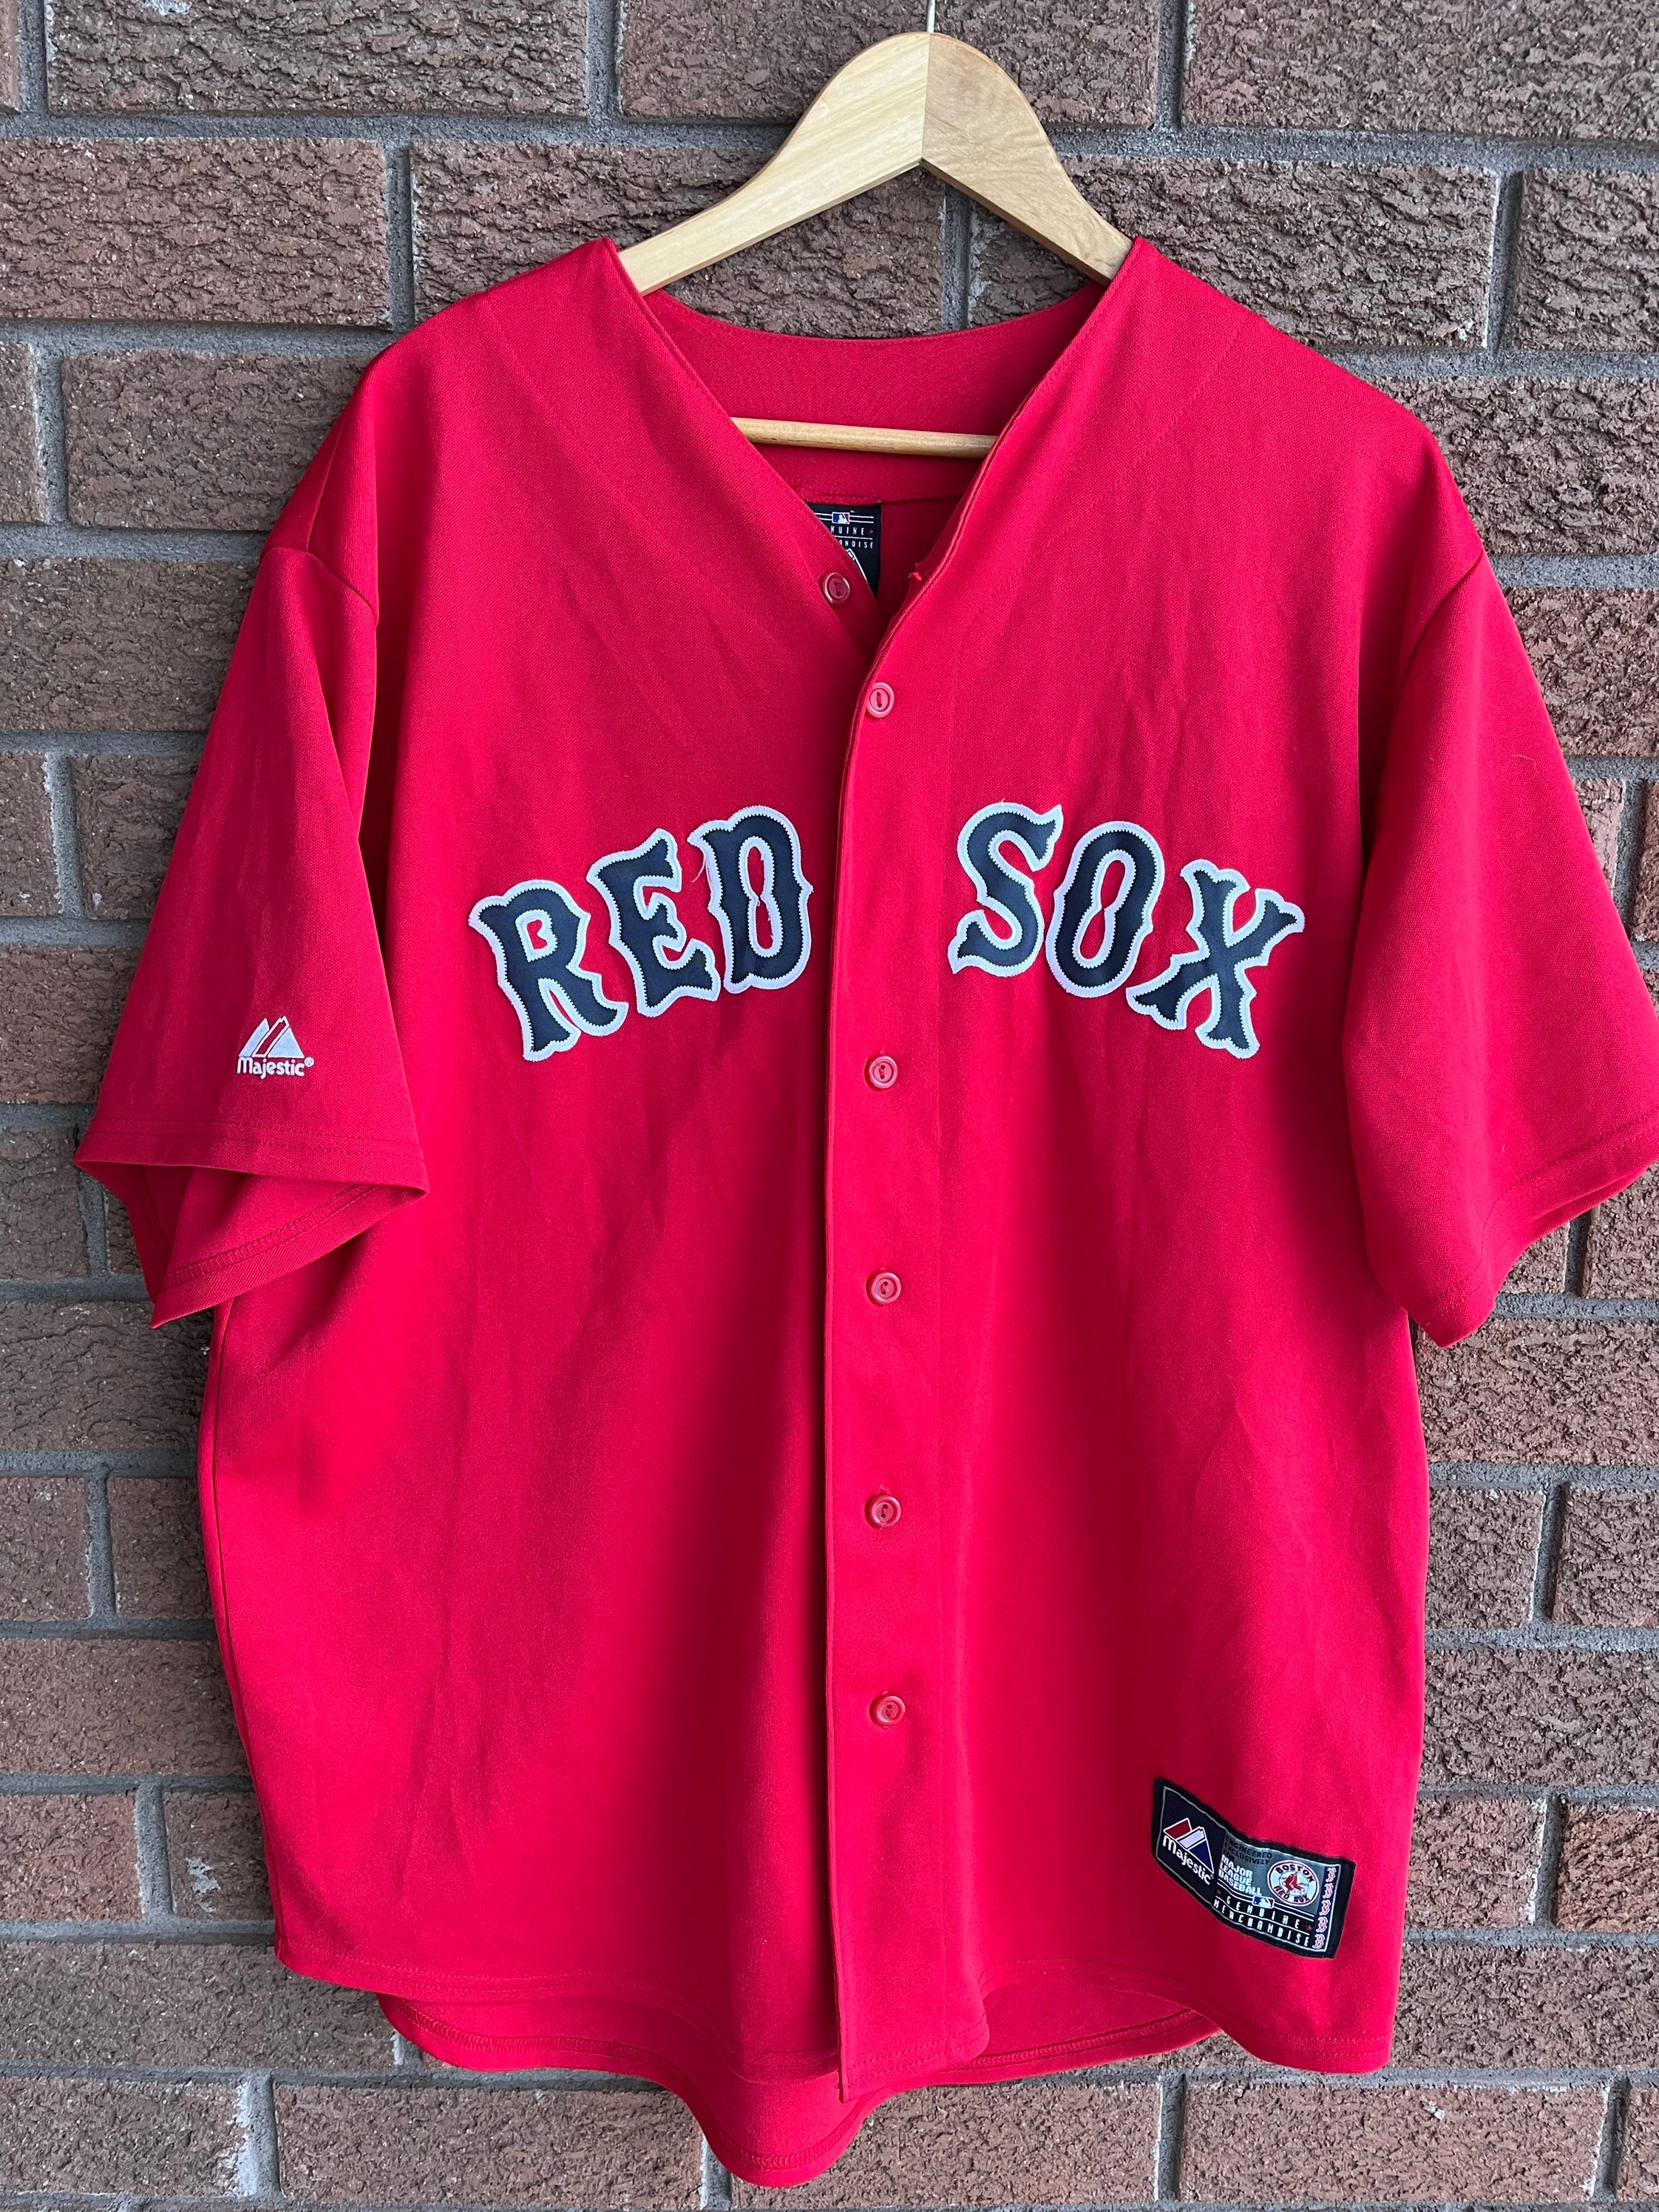 vintage red sox jersey